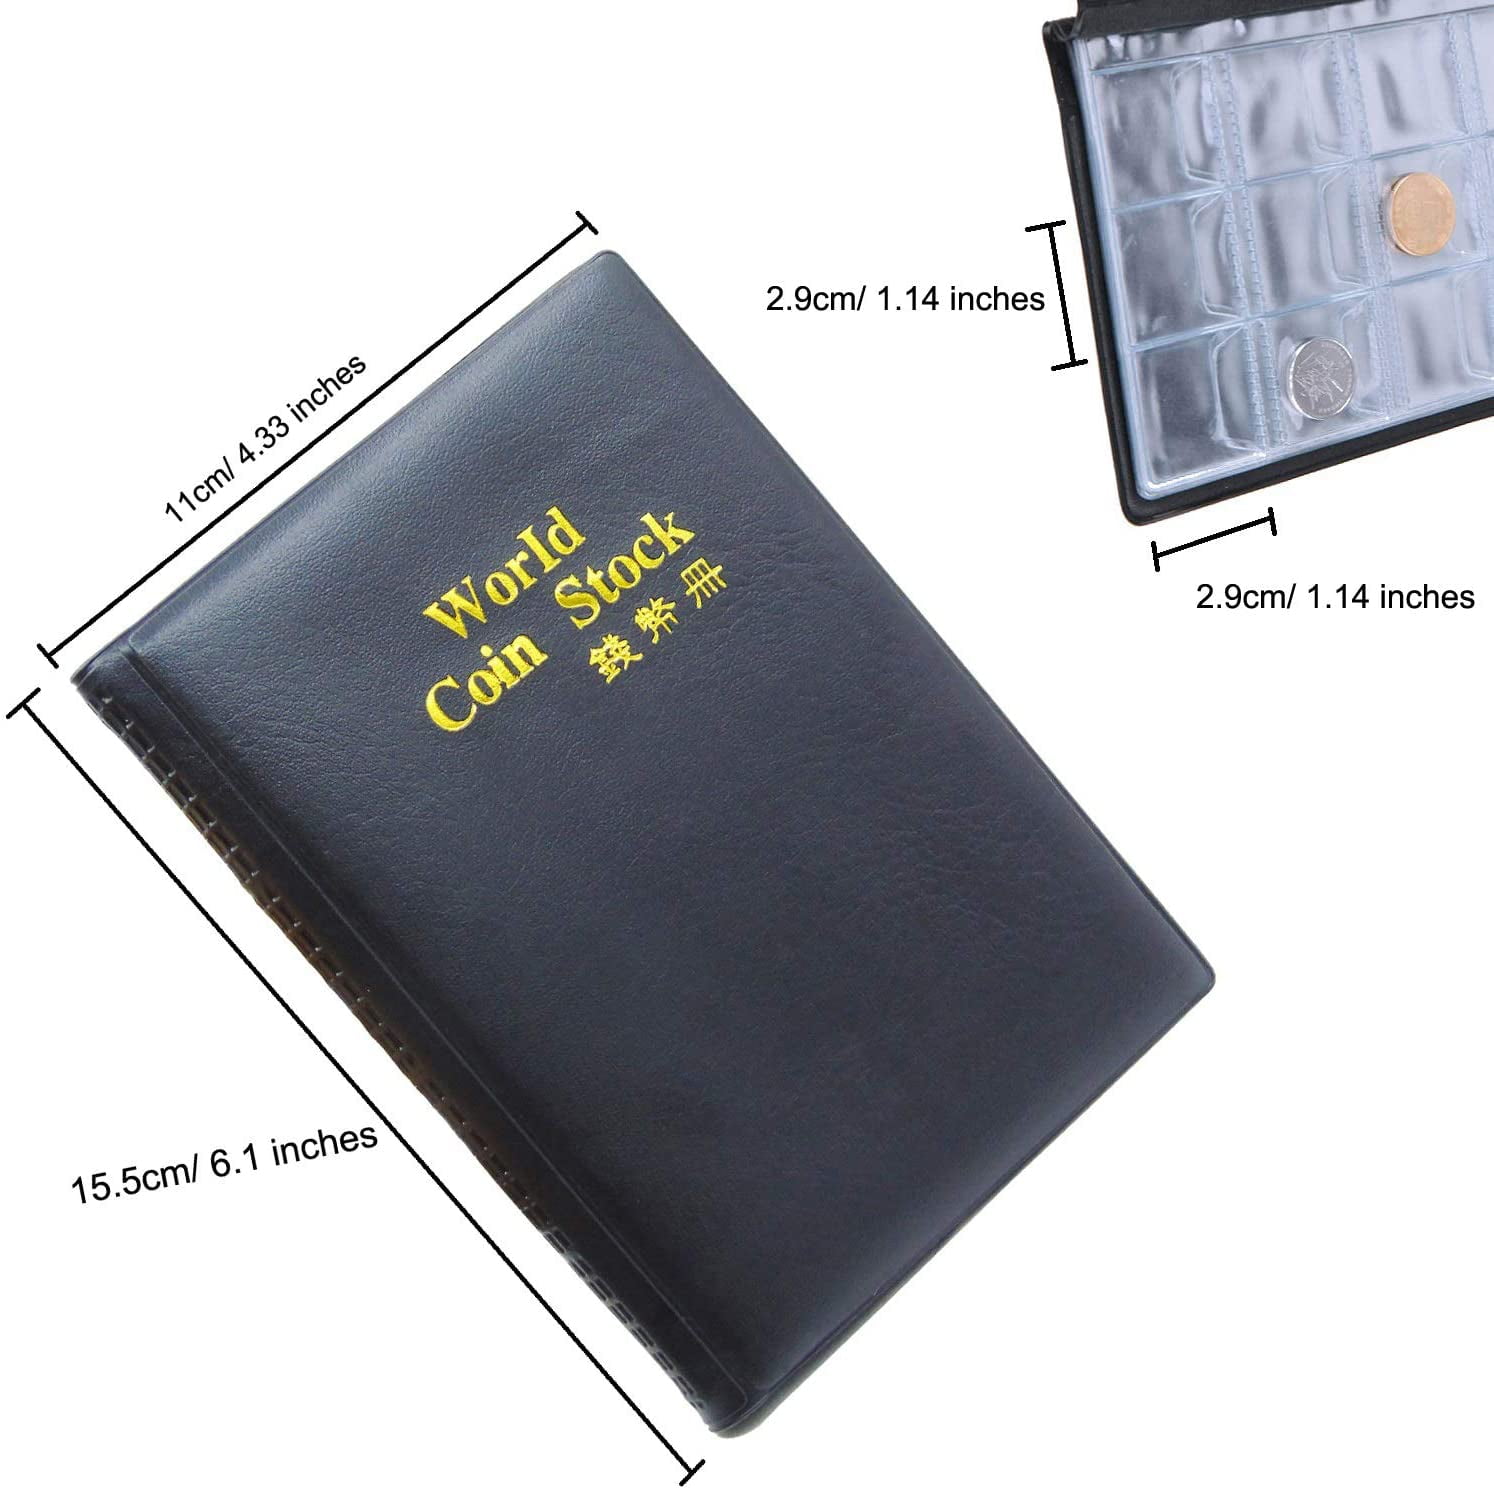  Uncle Paul Coin Album Coin Holder Coin Collection Book for  Penny/Nickel/Dime/One pound/20 Pence/10 Pence 120 Pockets CS3712 :  Everything Else